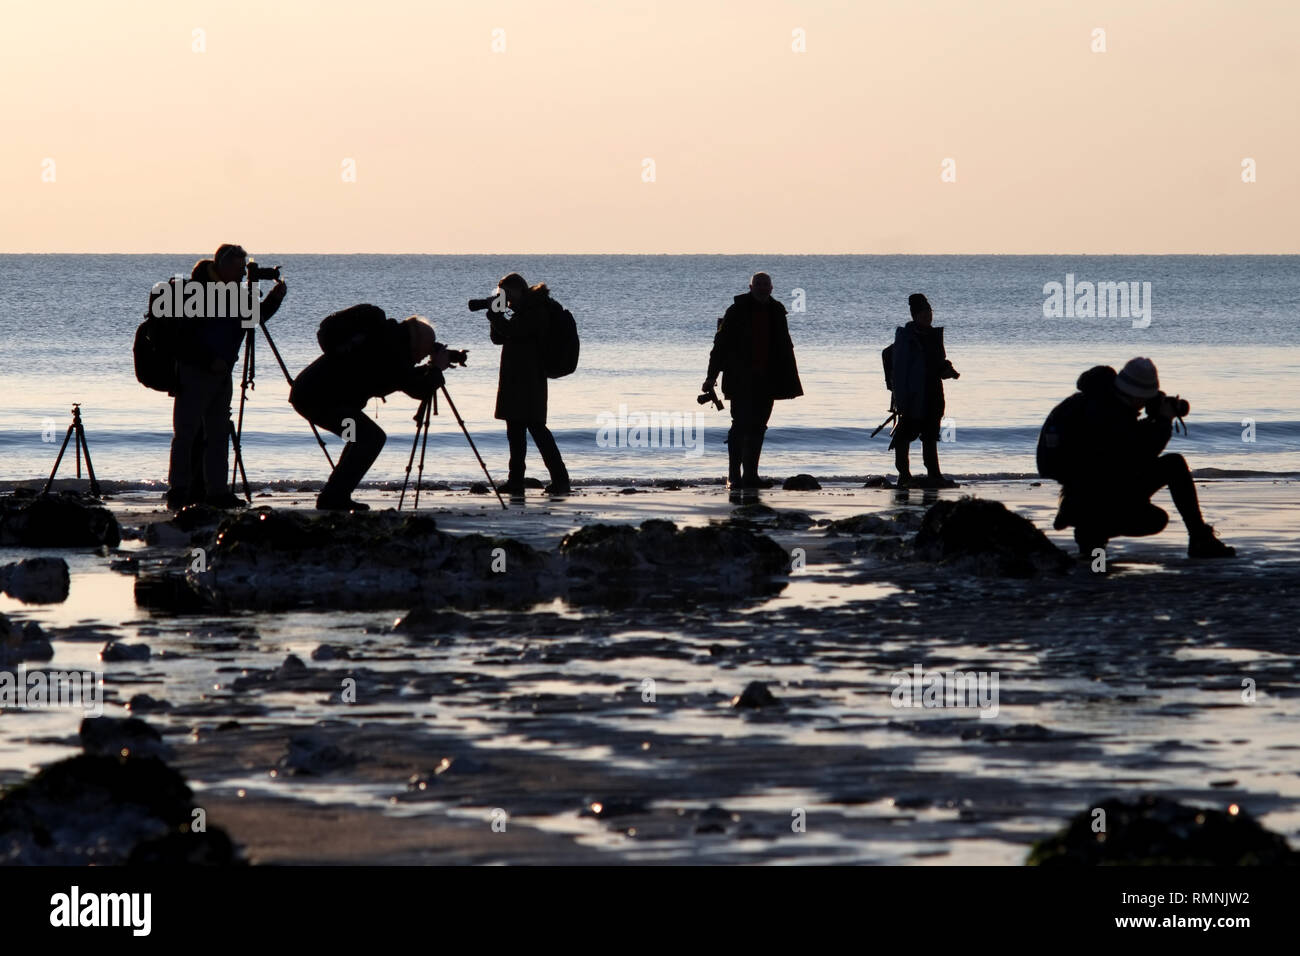 Group of amateur photographers photographing the sunset on a beach. Stock Photo